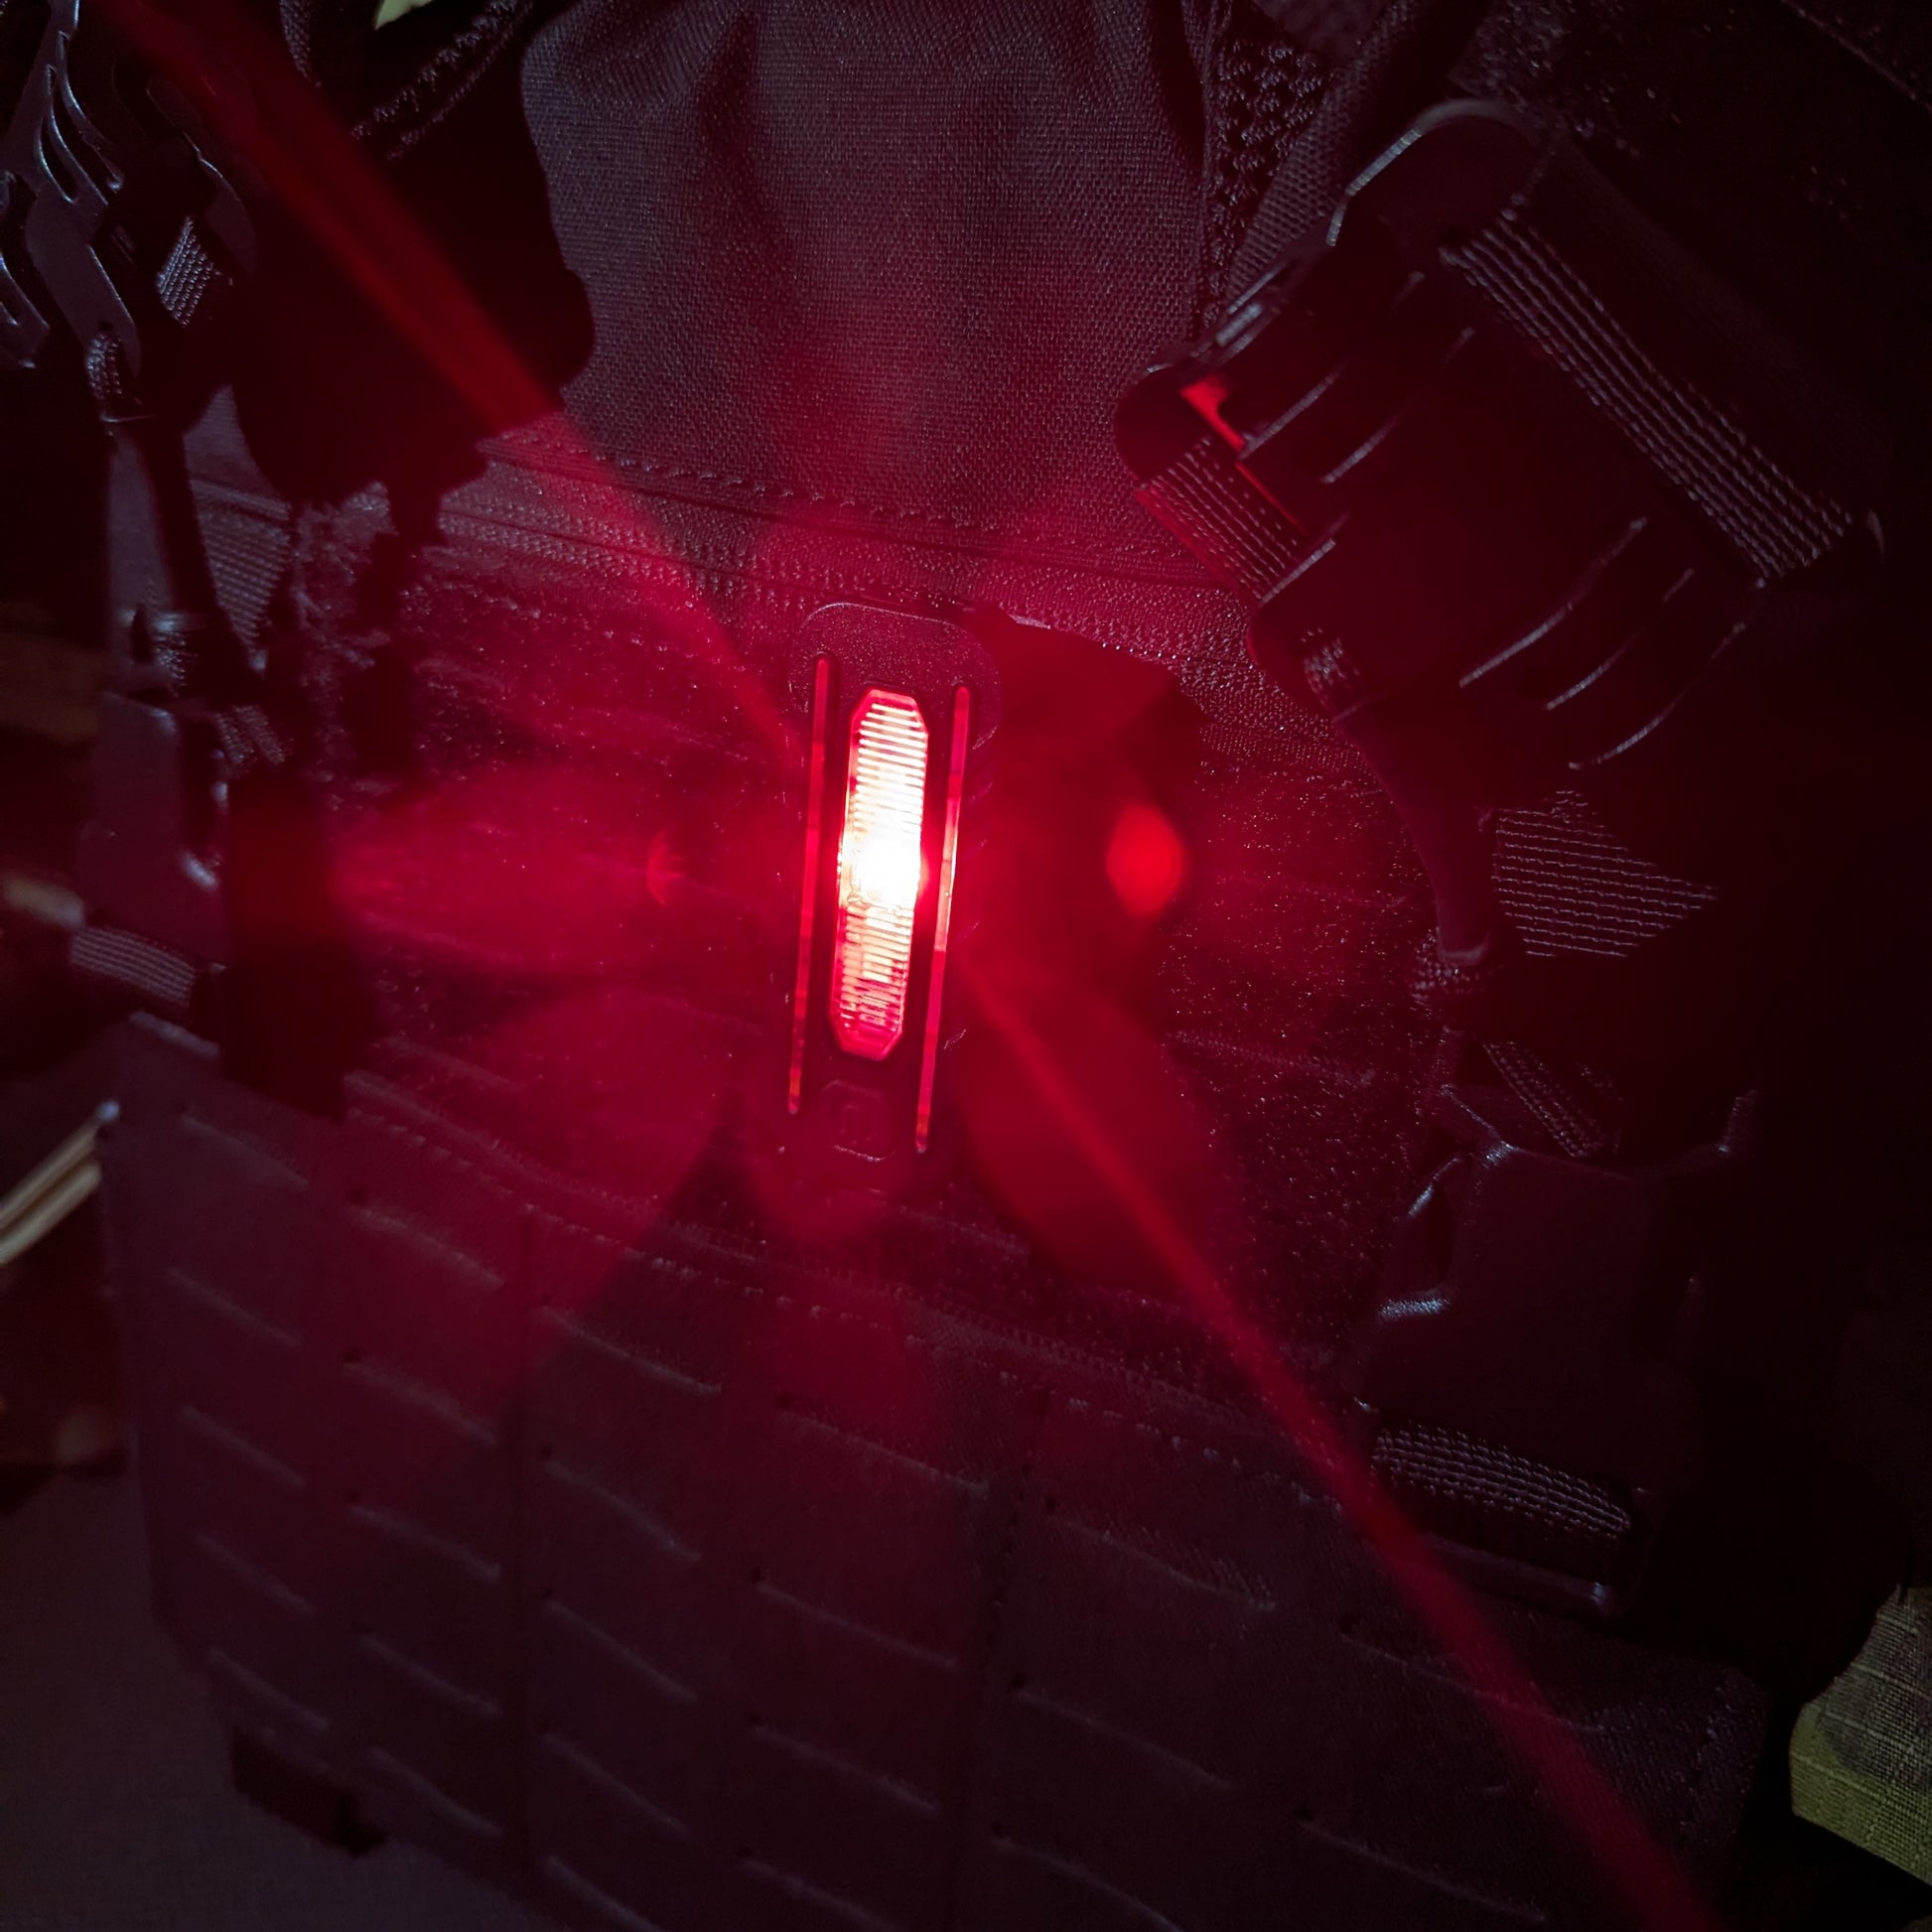 AKRYPT CL2 tactical and safety light for law enforcement, emergency services and military